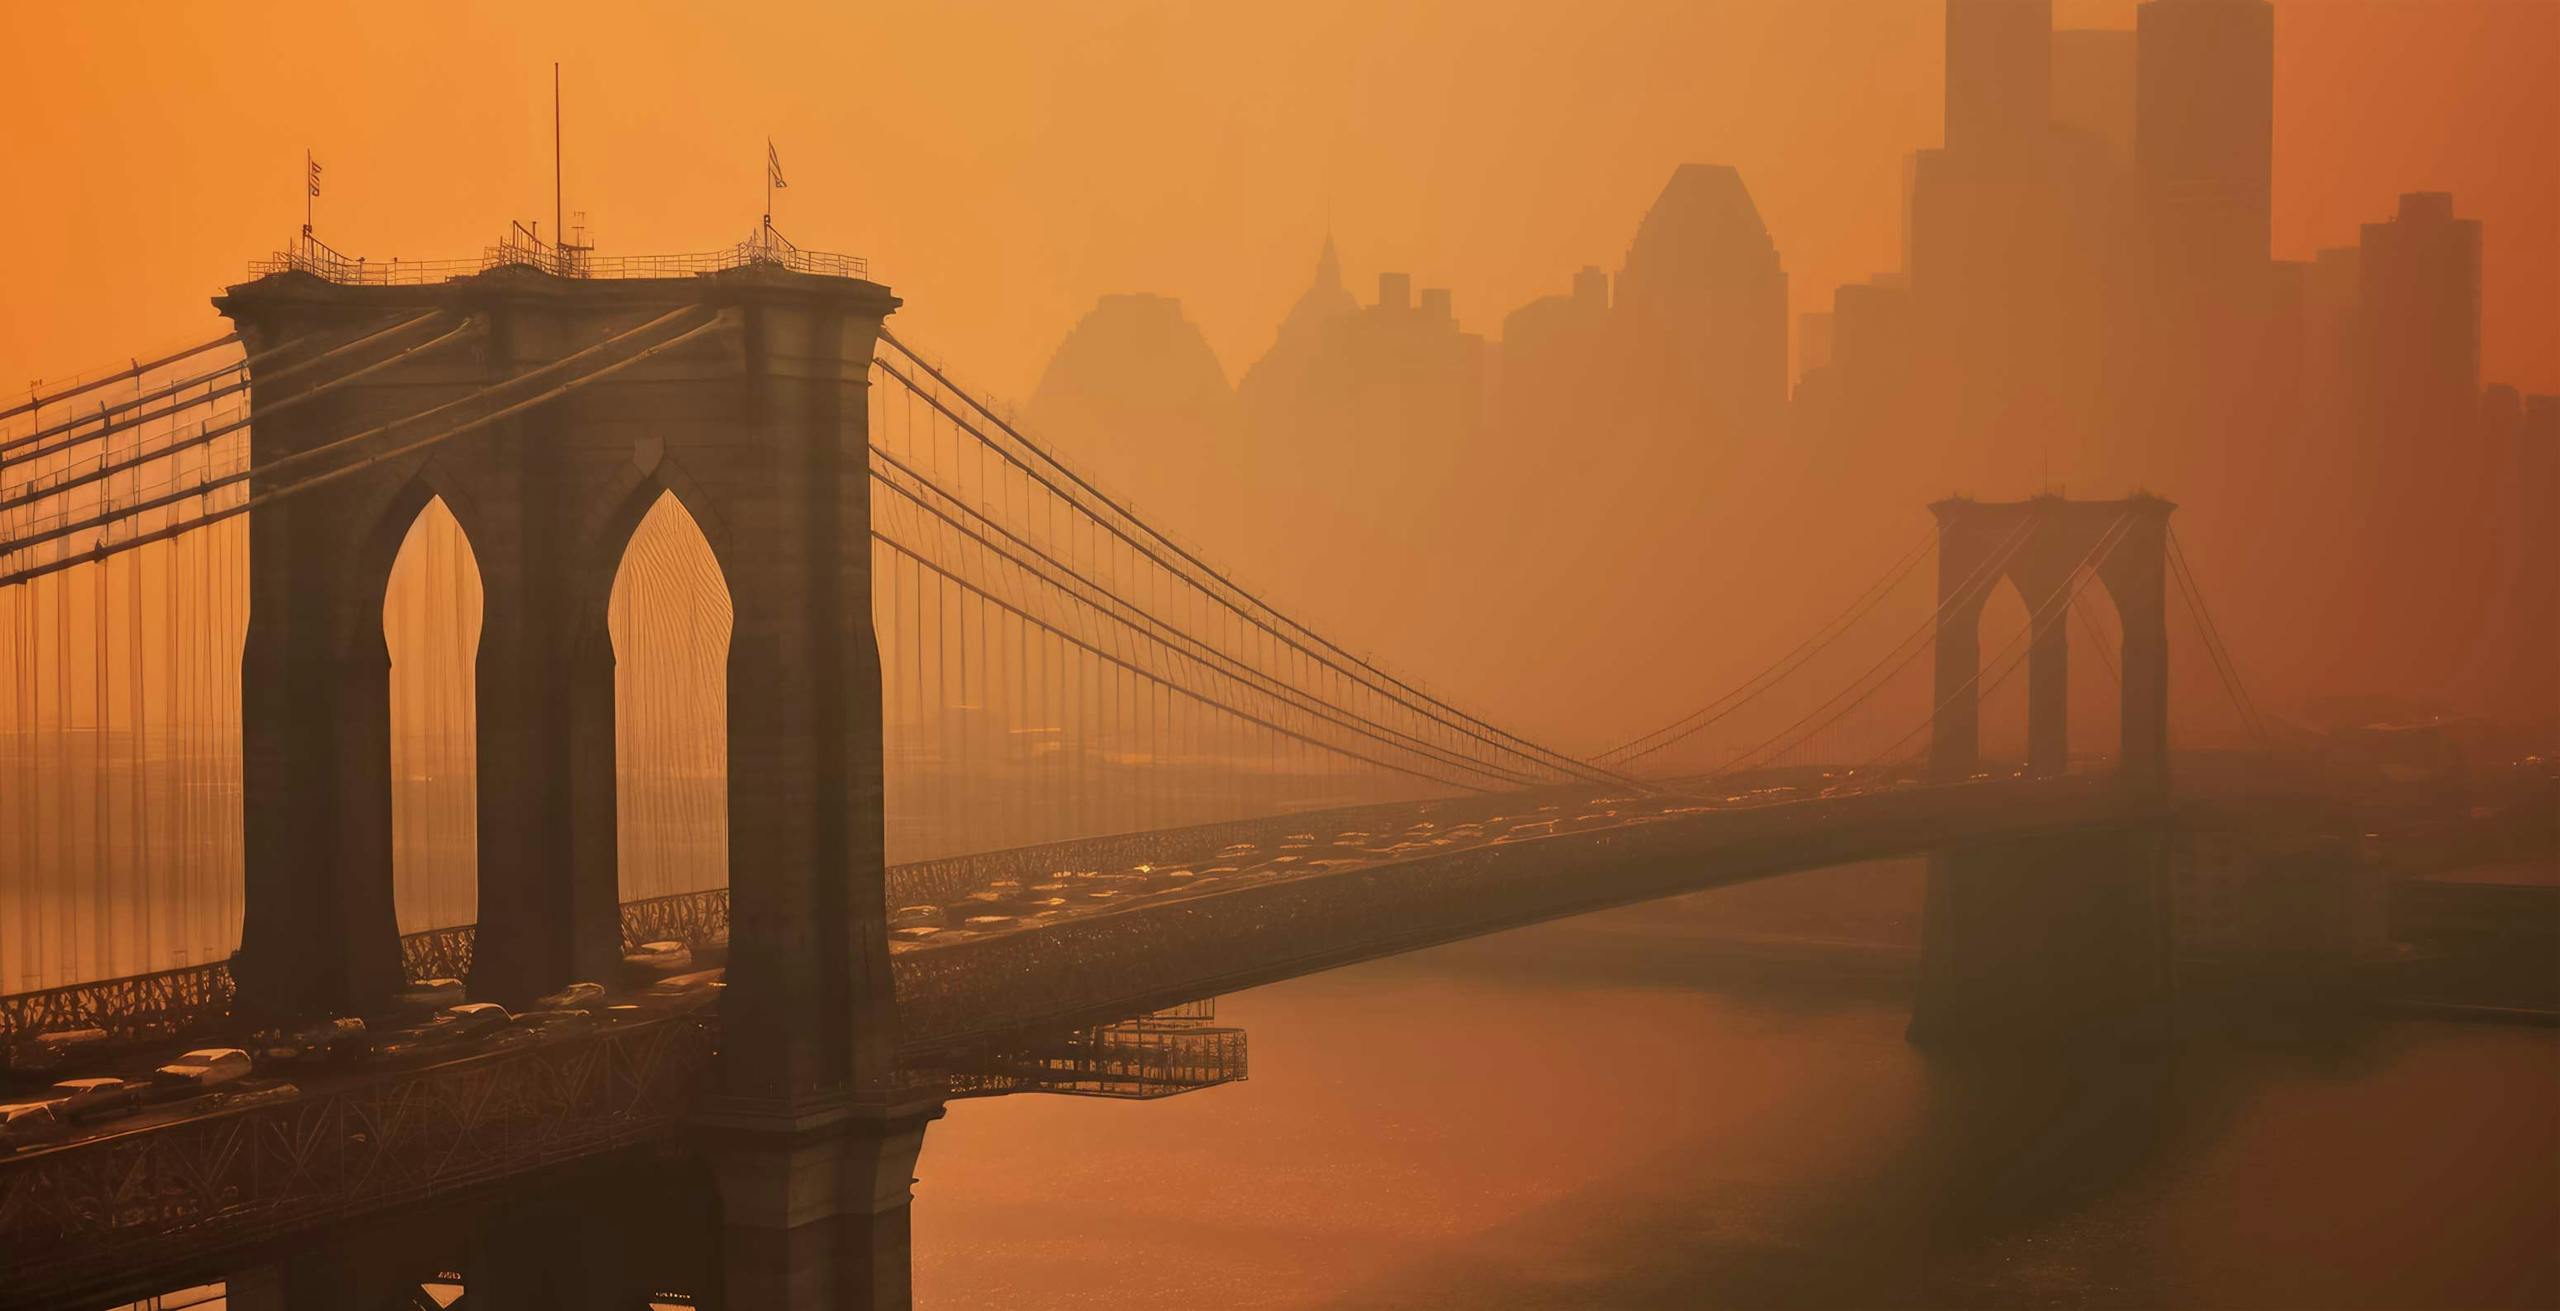 New York covered in smoke from wildfires